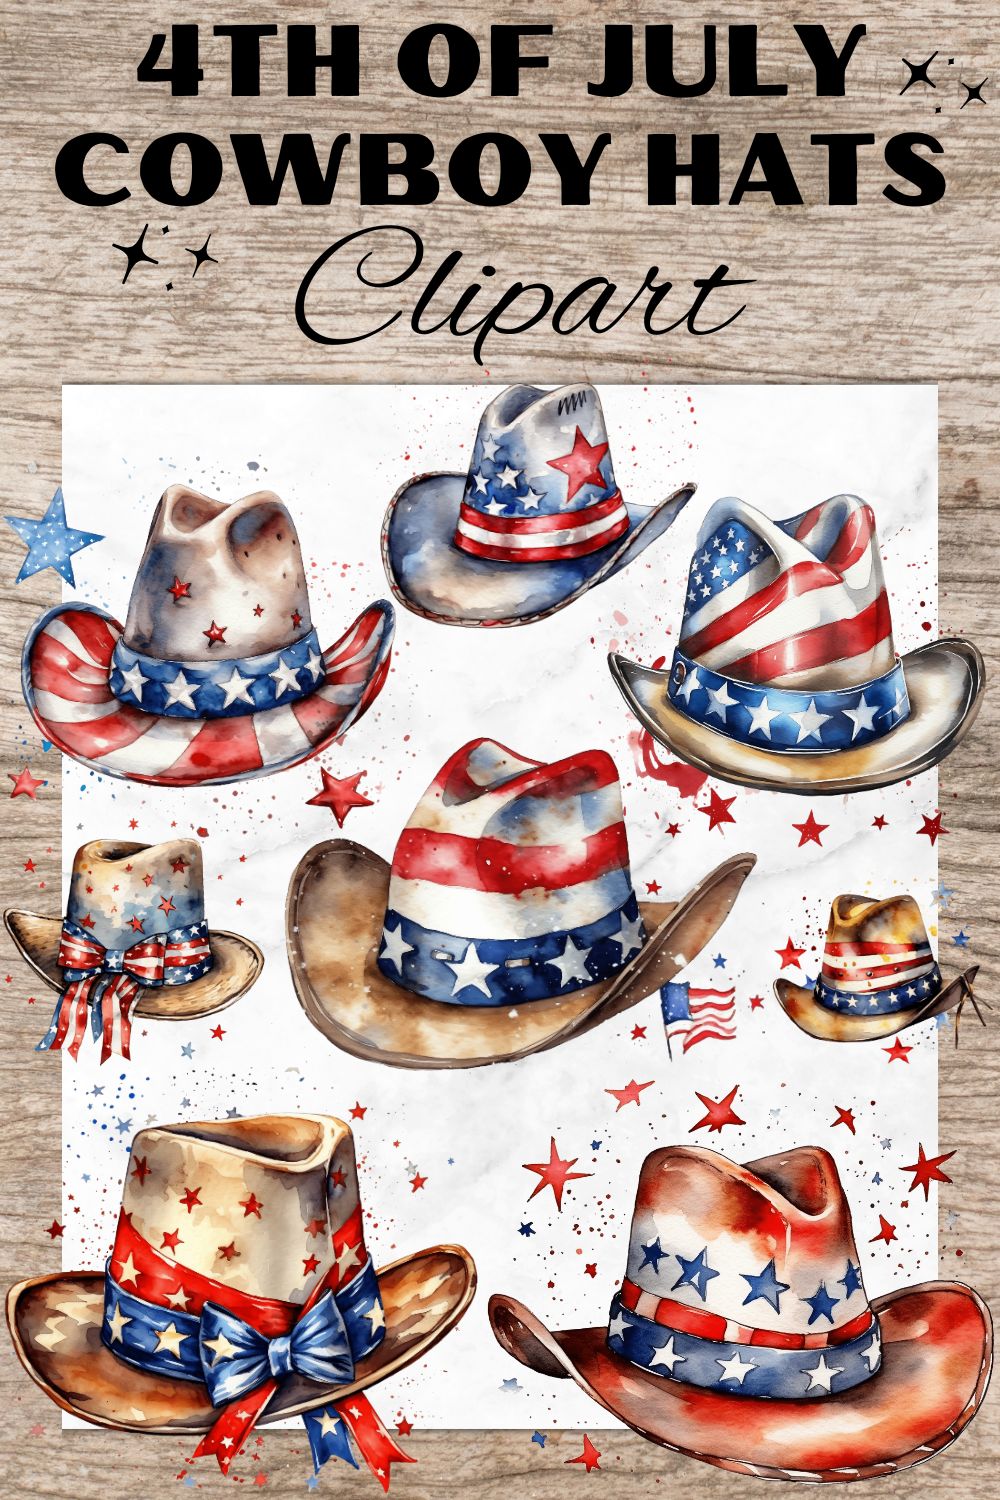 11 American 4th of July Cowboy Hat PNG, Watercolor Clipart, Cowboy Hat, Transparent PNG, Digital Paper Craft, Illustrations, Watercolor Clipart for Scrapbook, Invitation, Wall Art, T-Shirt Design pinterest preview image.